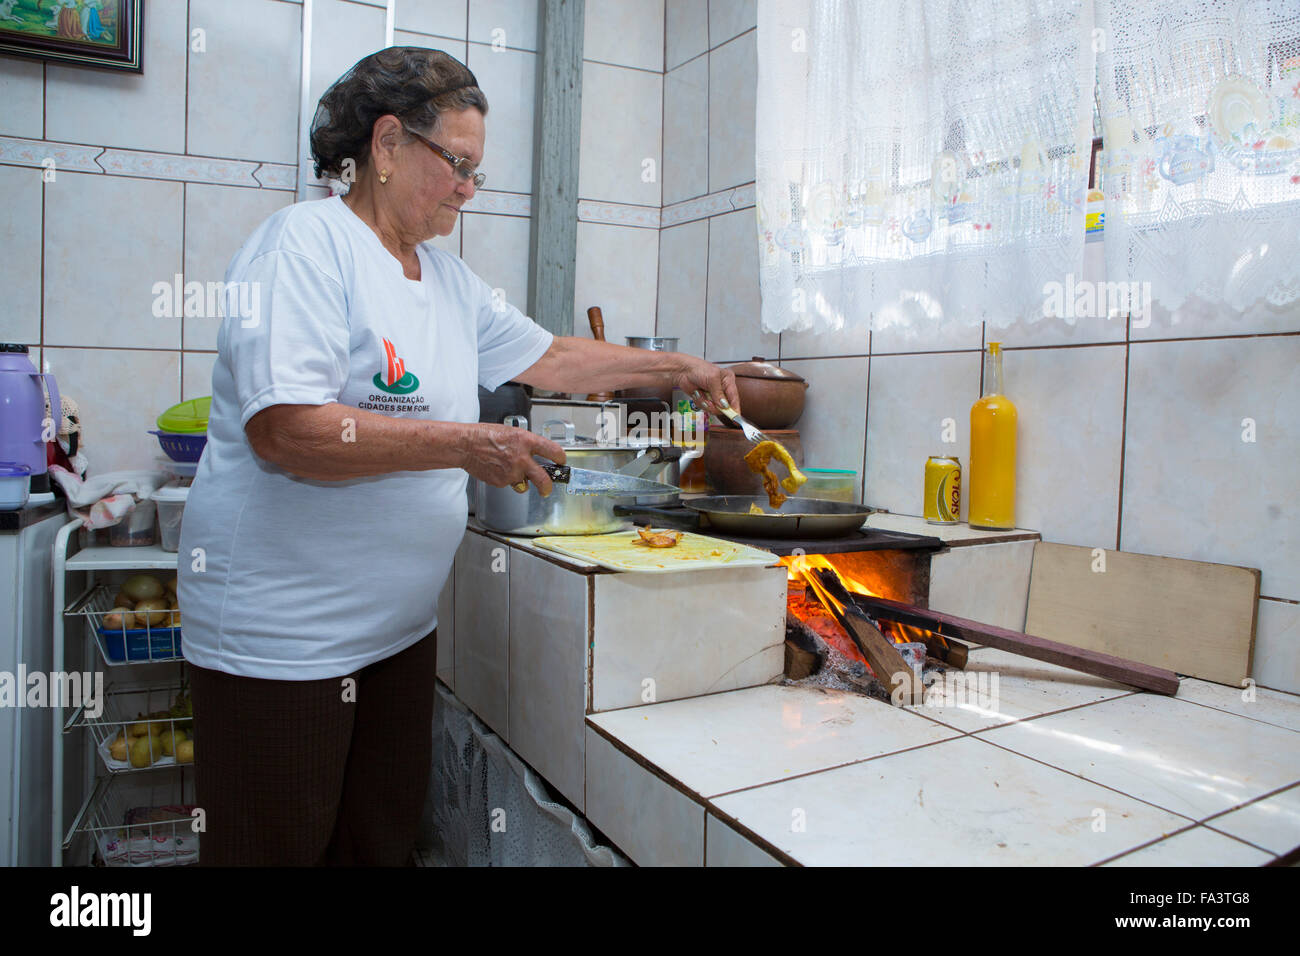 South America, Brazil, Sao Paulo. A local woman cooking food in her kitchen on a wood-fired traditional forno a lenha stove Stock Photo